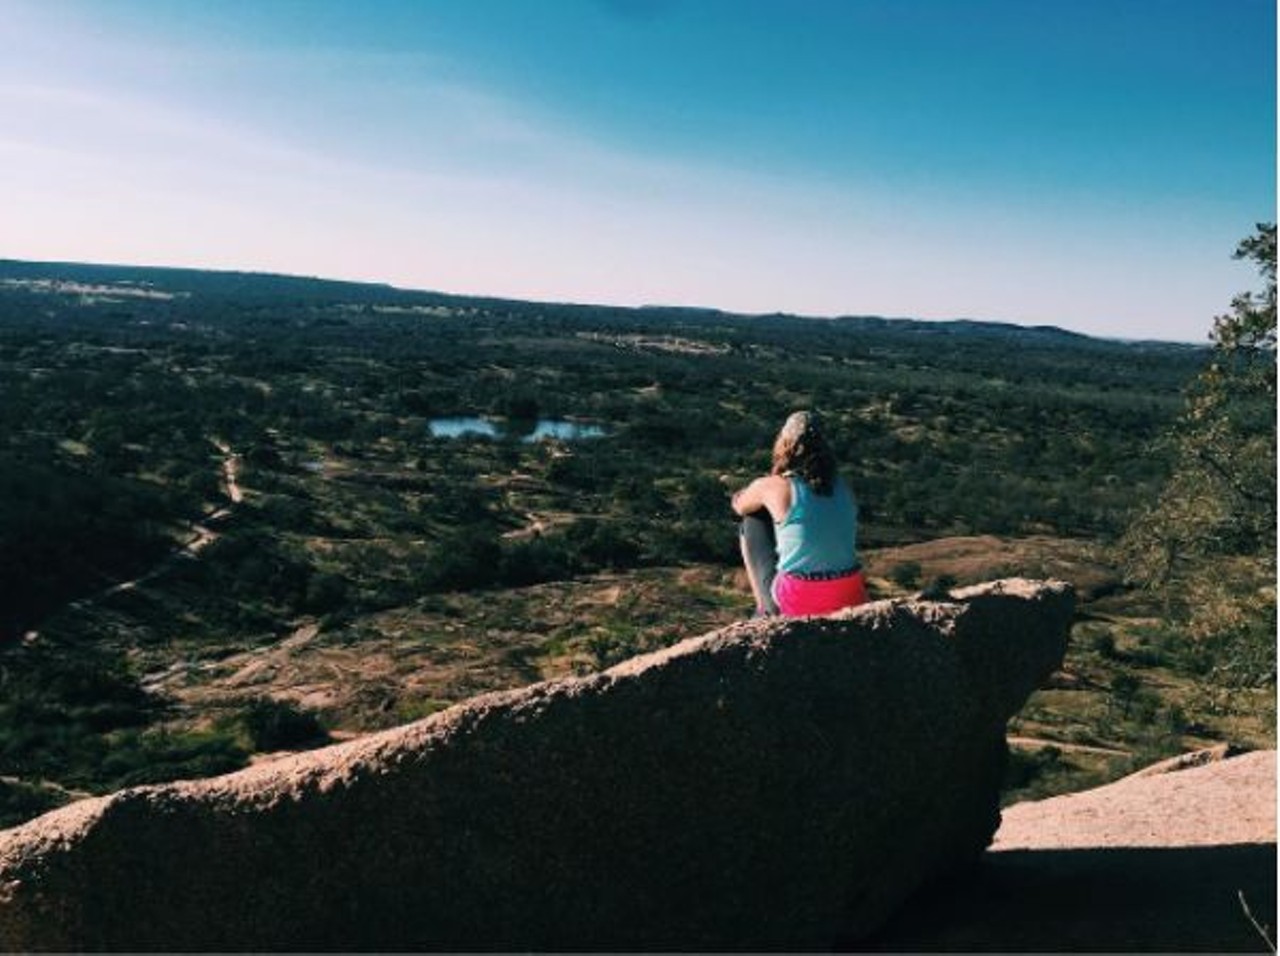 Enchanted Rock State Natural Area
16710 Ranch Road, Fredericksburg, tpwd.texas.gov/state-parks/enchanted-rock
Enchanted rock: land of the magical, mystical and well, enchanted, as the Texas Parks and Wildlife puts it. Explore the 11 miles of hiking and be glad you&#146;re not stuck inside the city. 
Photo via Instagram, taaylurr2